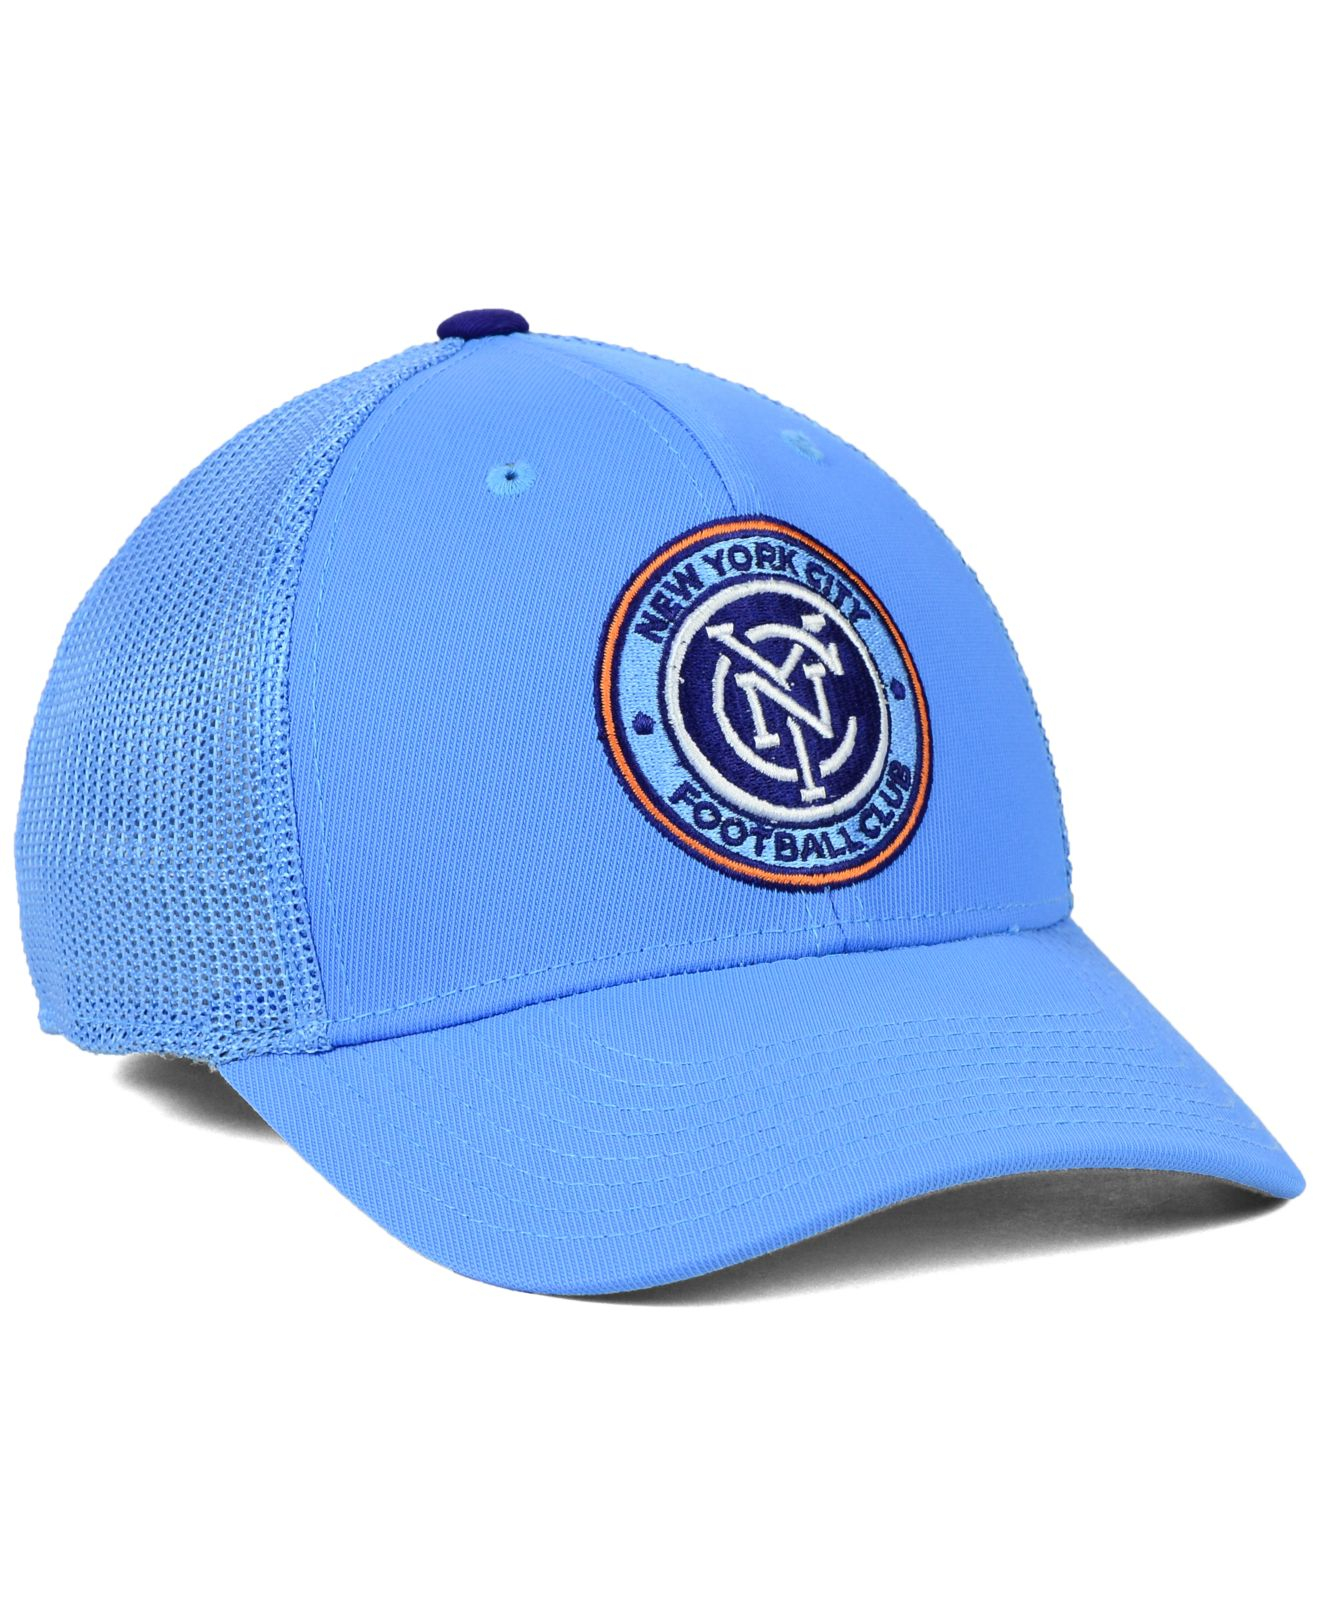 Lyst - Adidas Originals New York City Fc Stretch-fit Cap in Blue for Men